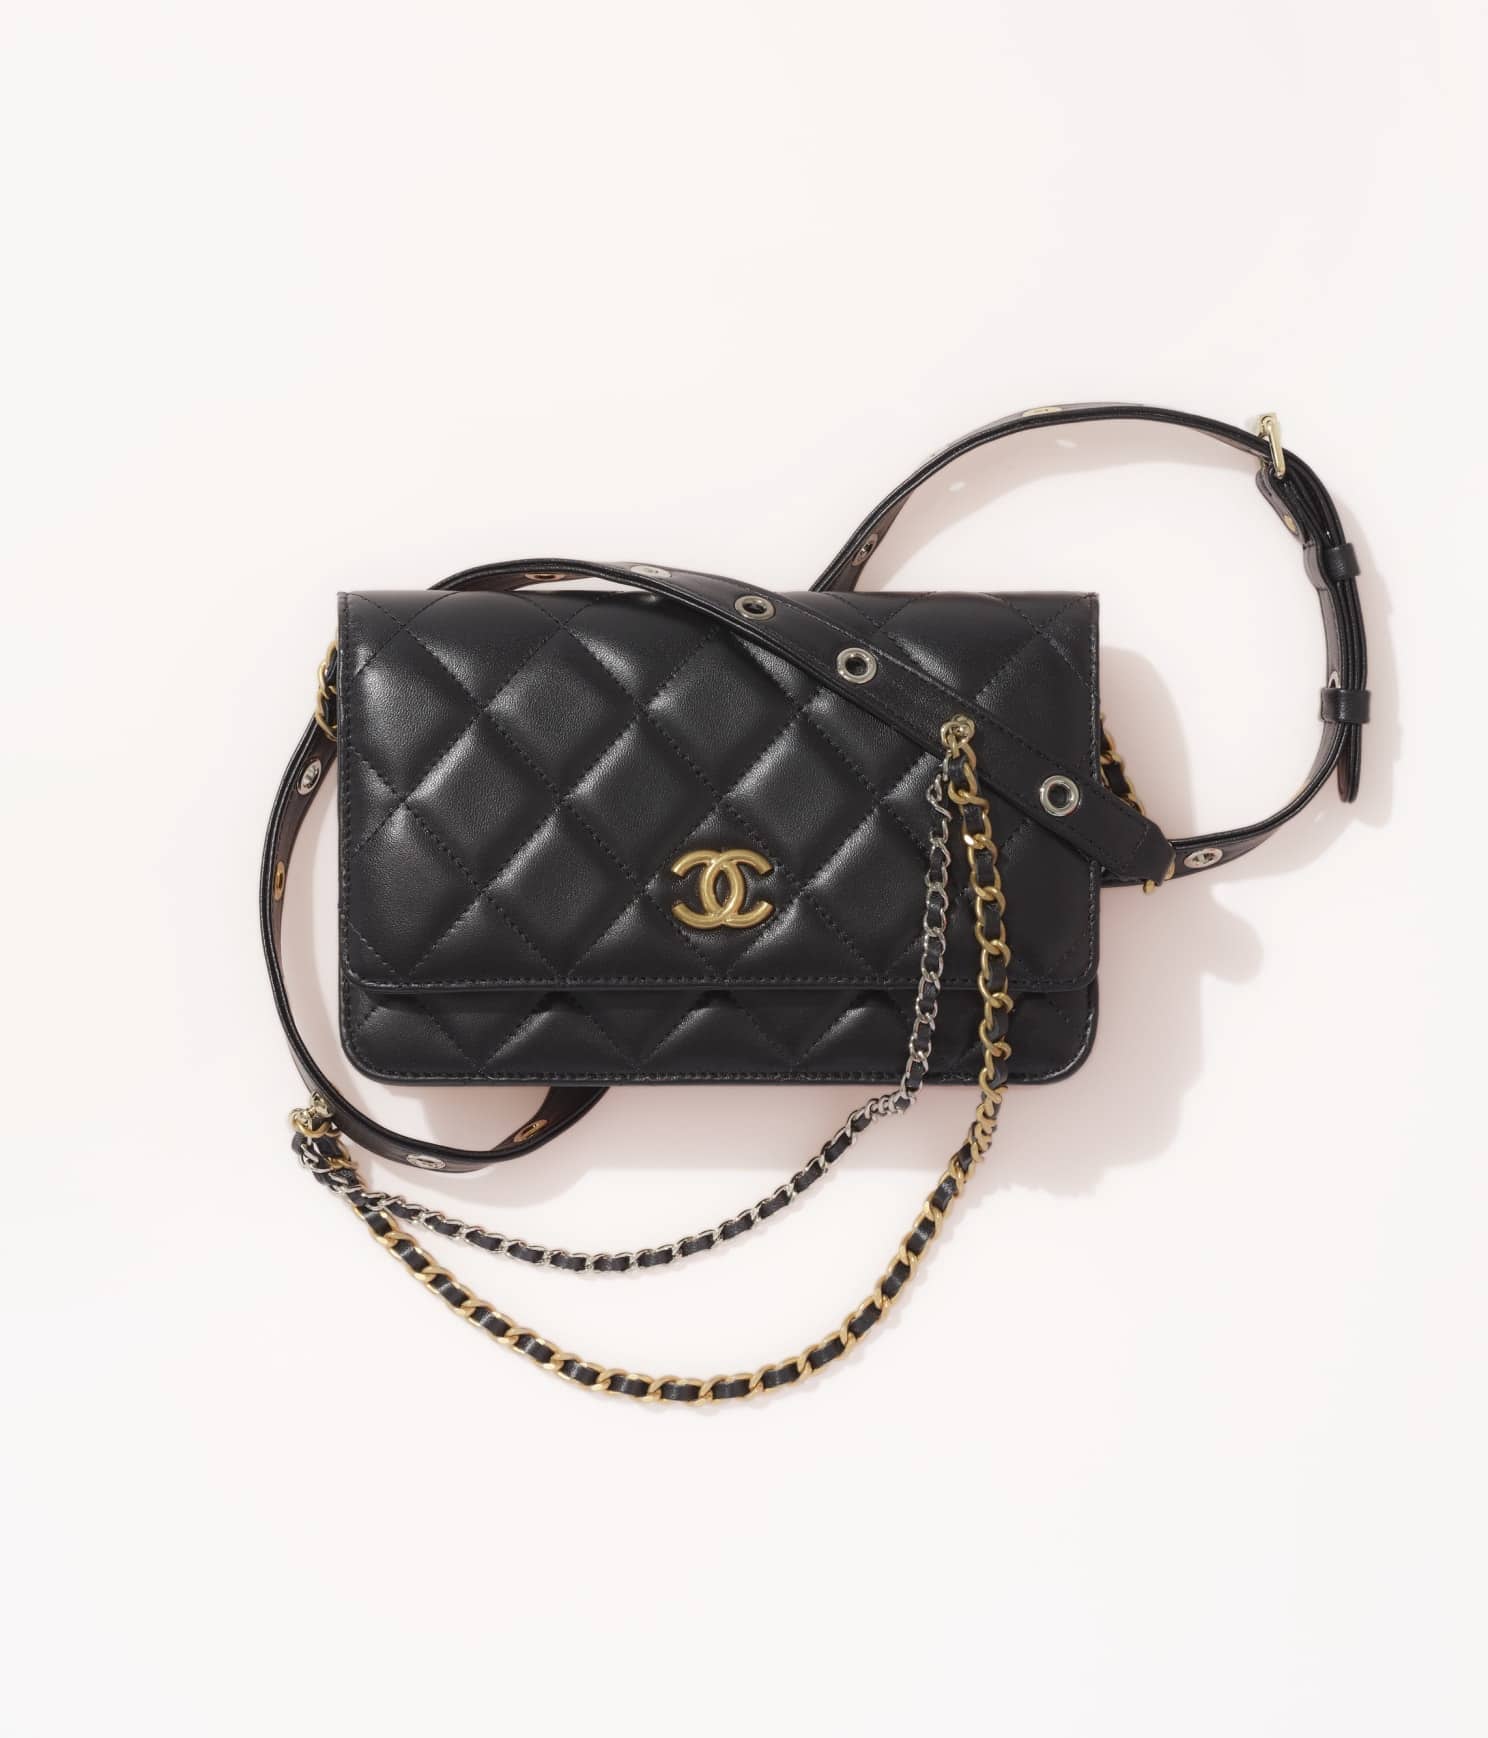 Europe Chanel Bag Price List Reference Guide (2022 Update